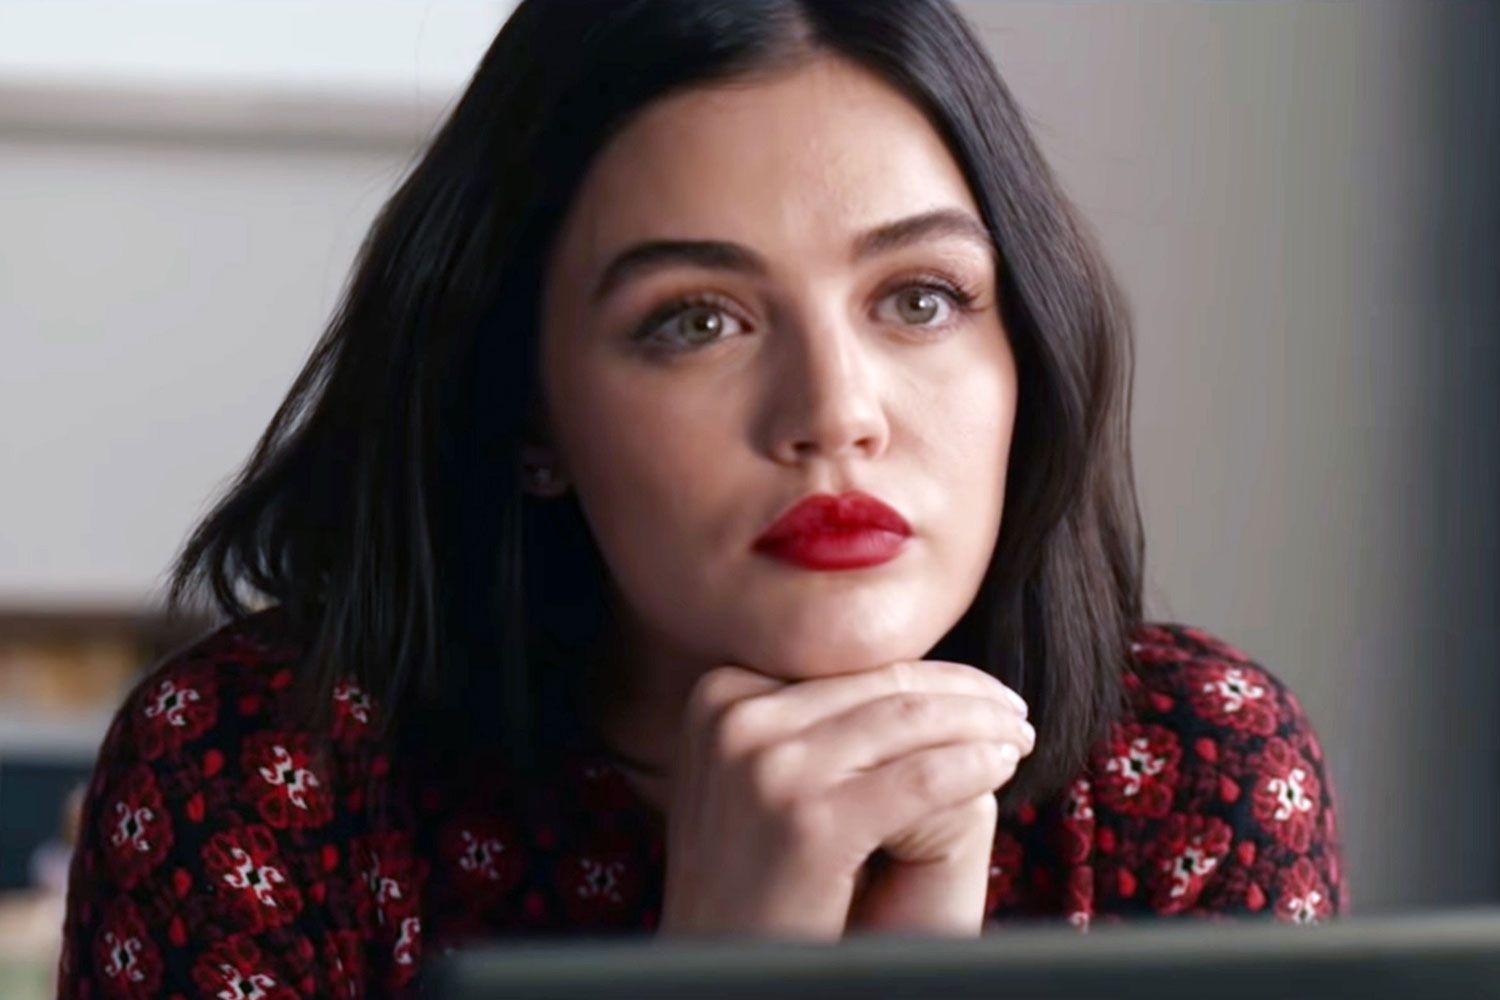 THE HATING GAME, Lucy Hale, 2021. © Vertical Entertainment / Courtesy Everett Collection